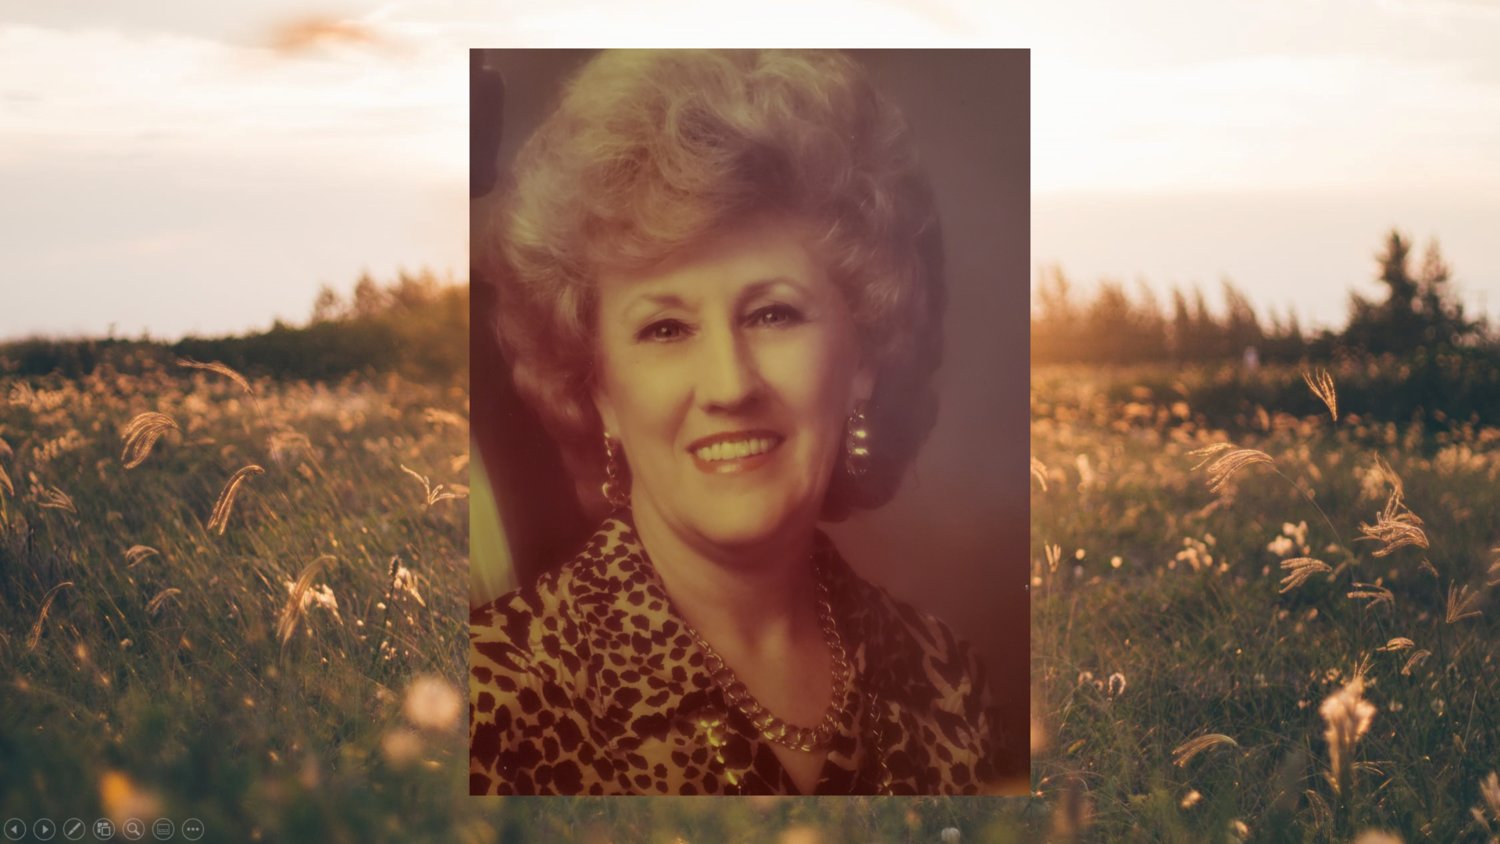 Velma Louise Petersen Engstrom passed away at the age of 91 on May 25. She will be greatly missed by her family and friends.